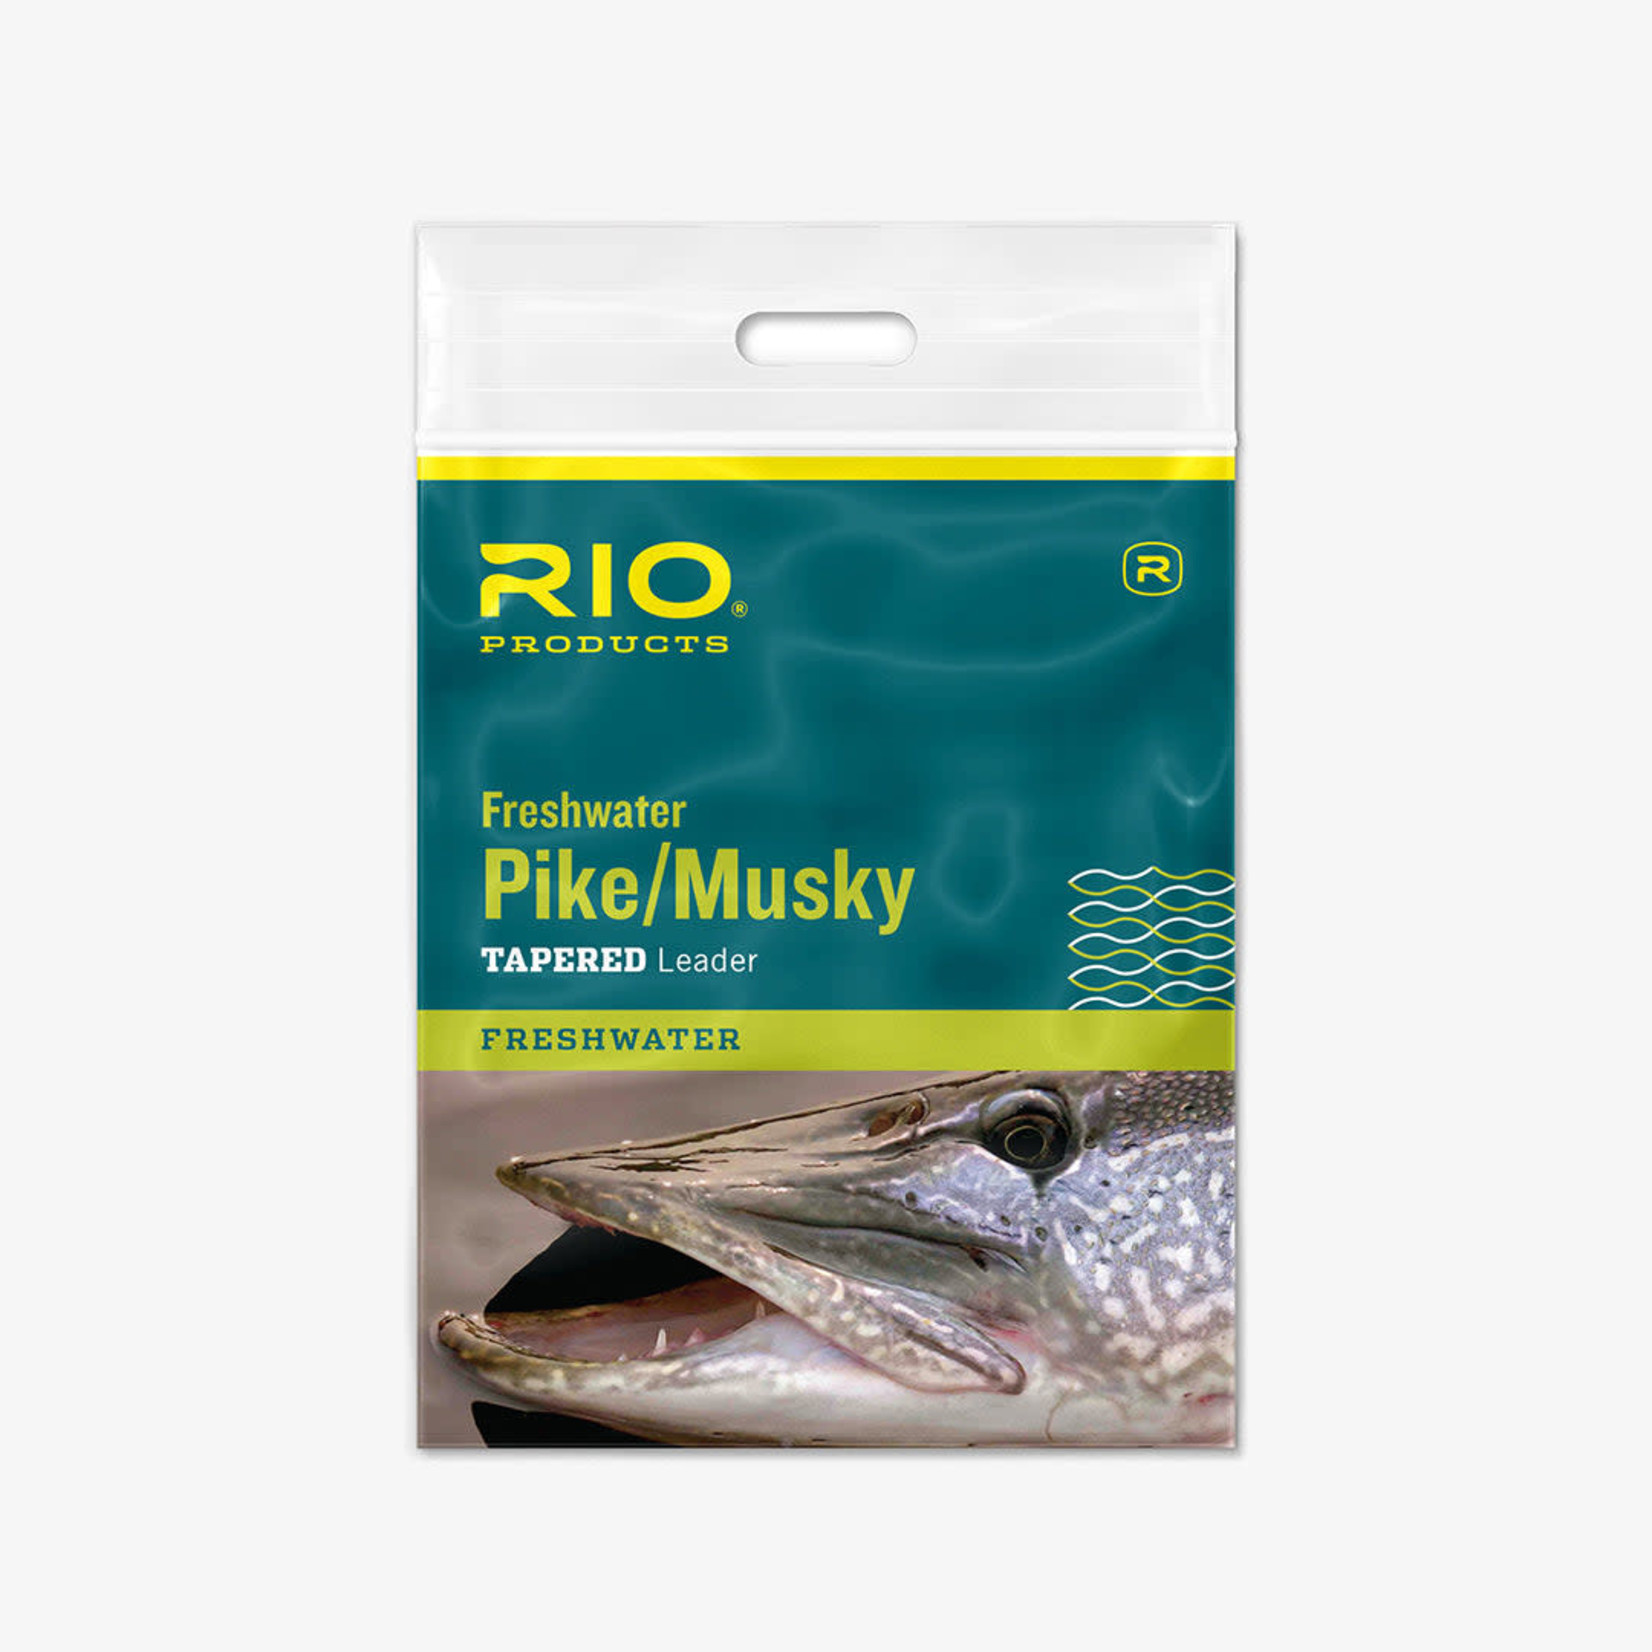 RIO Rio PIKE/MUSKY II 7.5' 20LB CLASS 20LB STAINLESS WIRE WITH SNAP